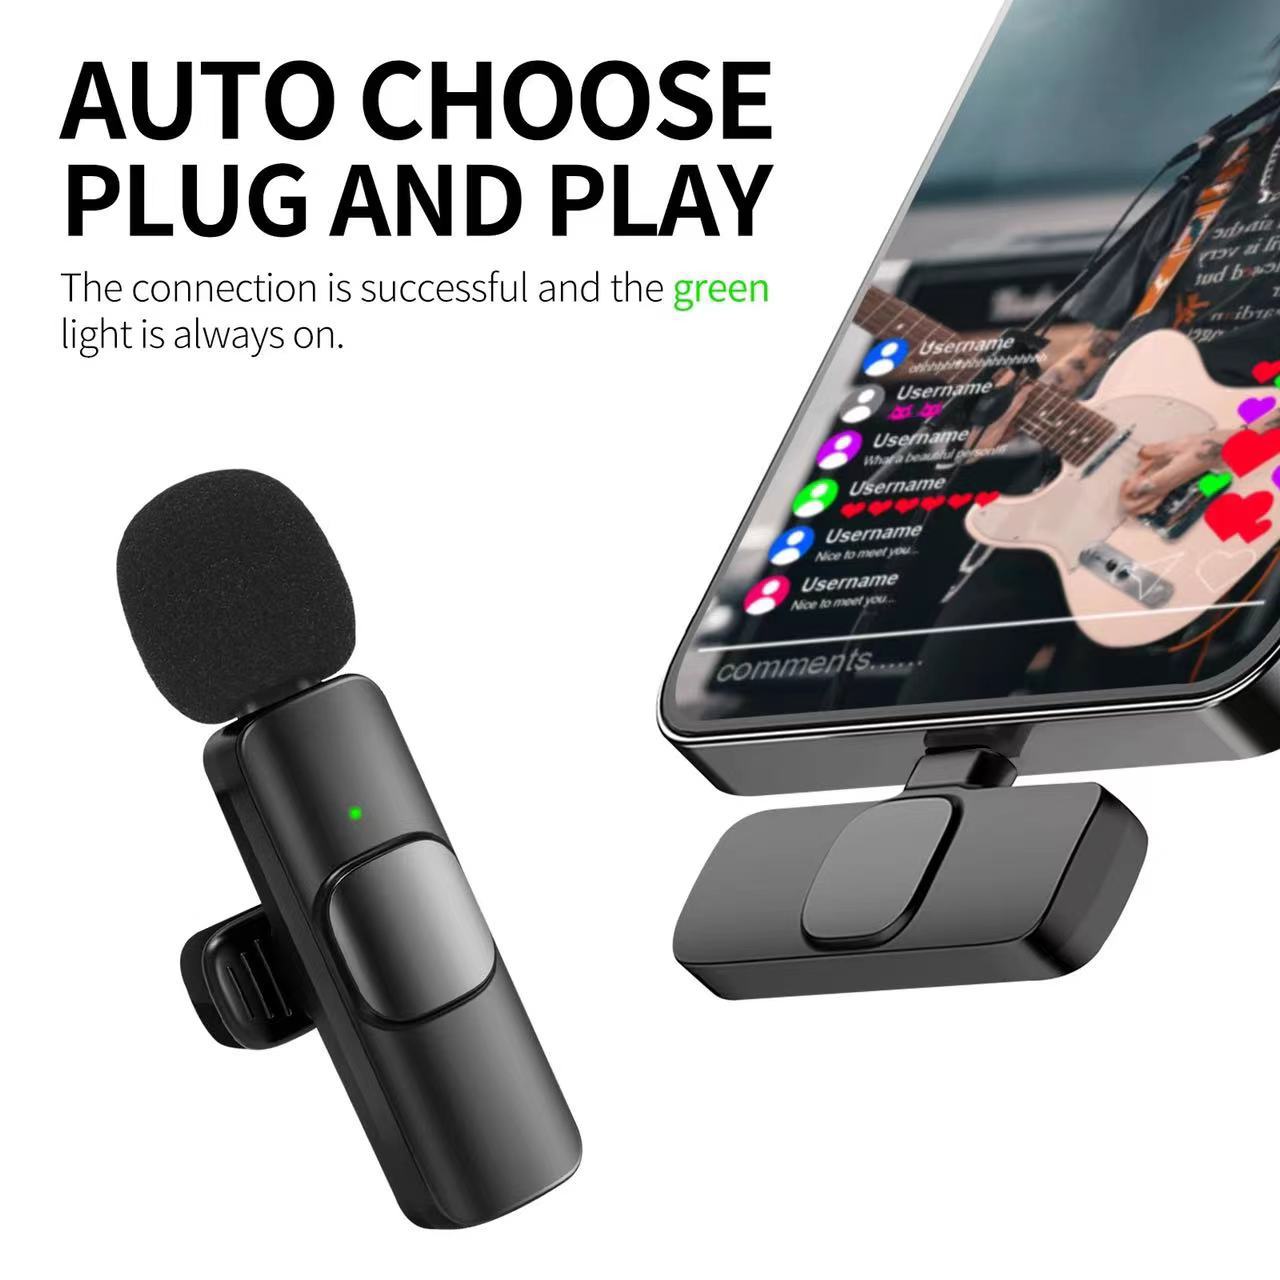 Compact Dual-Channel Wireless Lavalier Microphone System for Creators - Crystal Clear Audio for Live Streaming, Vlogging, Podcasts, TikTok Content Creation & More